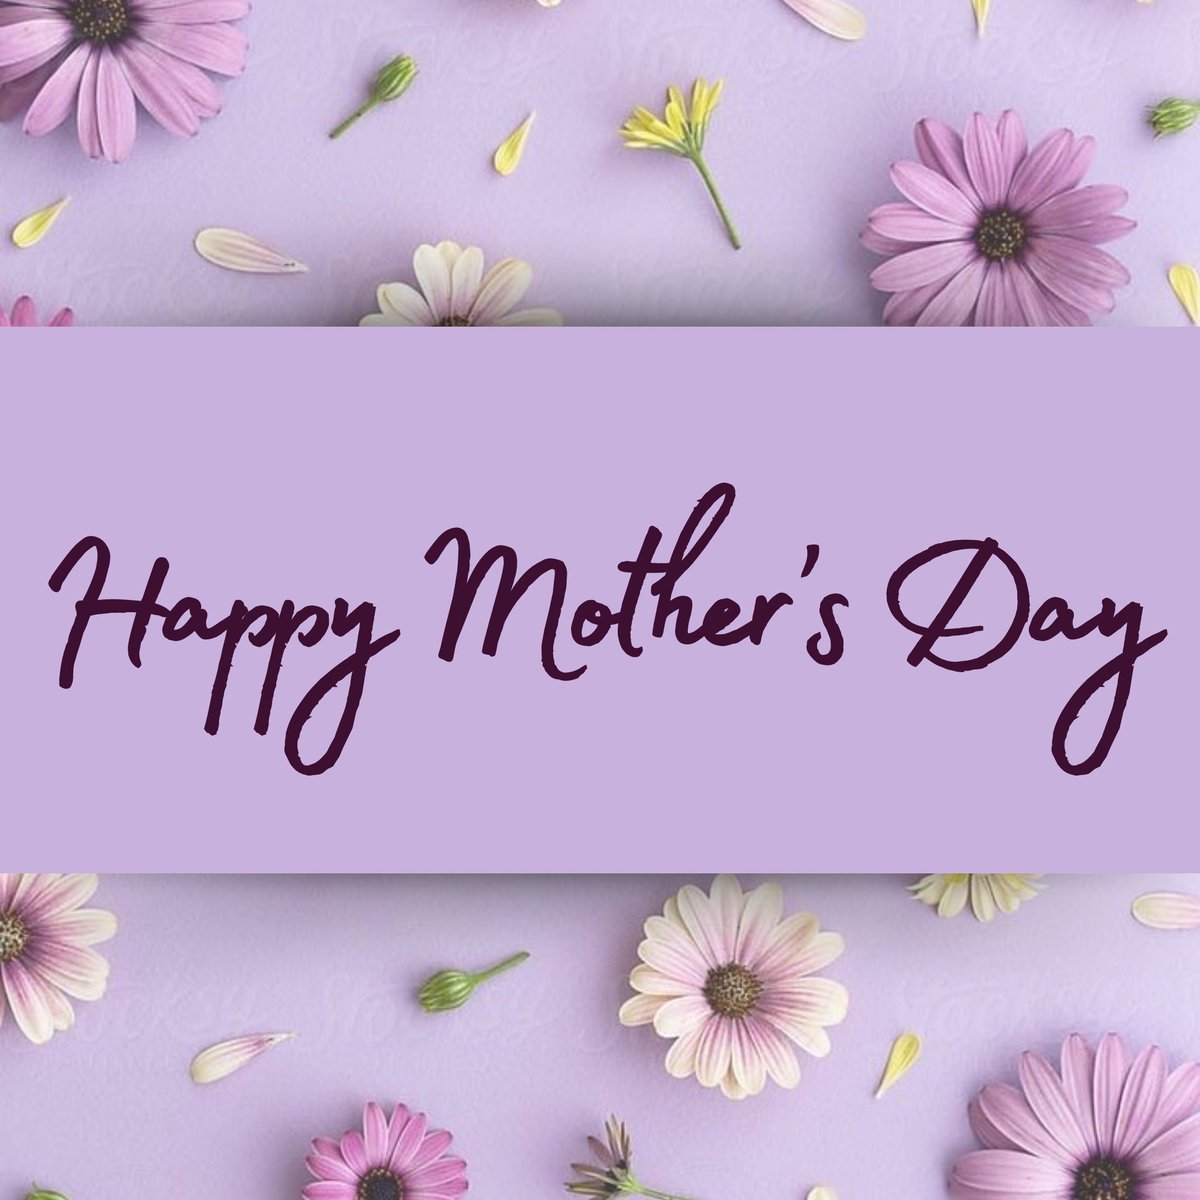 Ro all of #OurKids moms...HAPPY MOTHER'S DAY! 💐💜